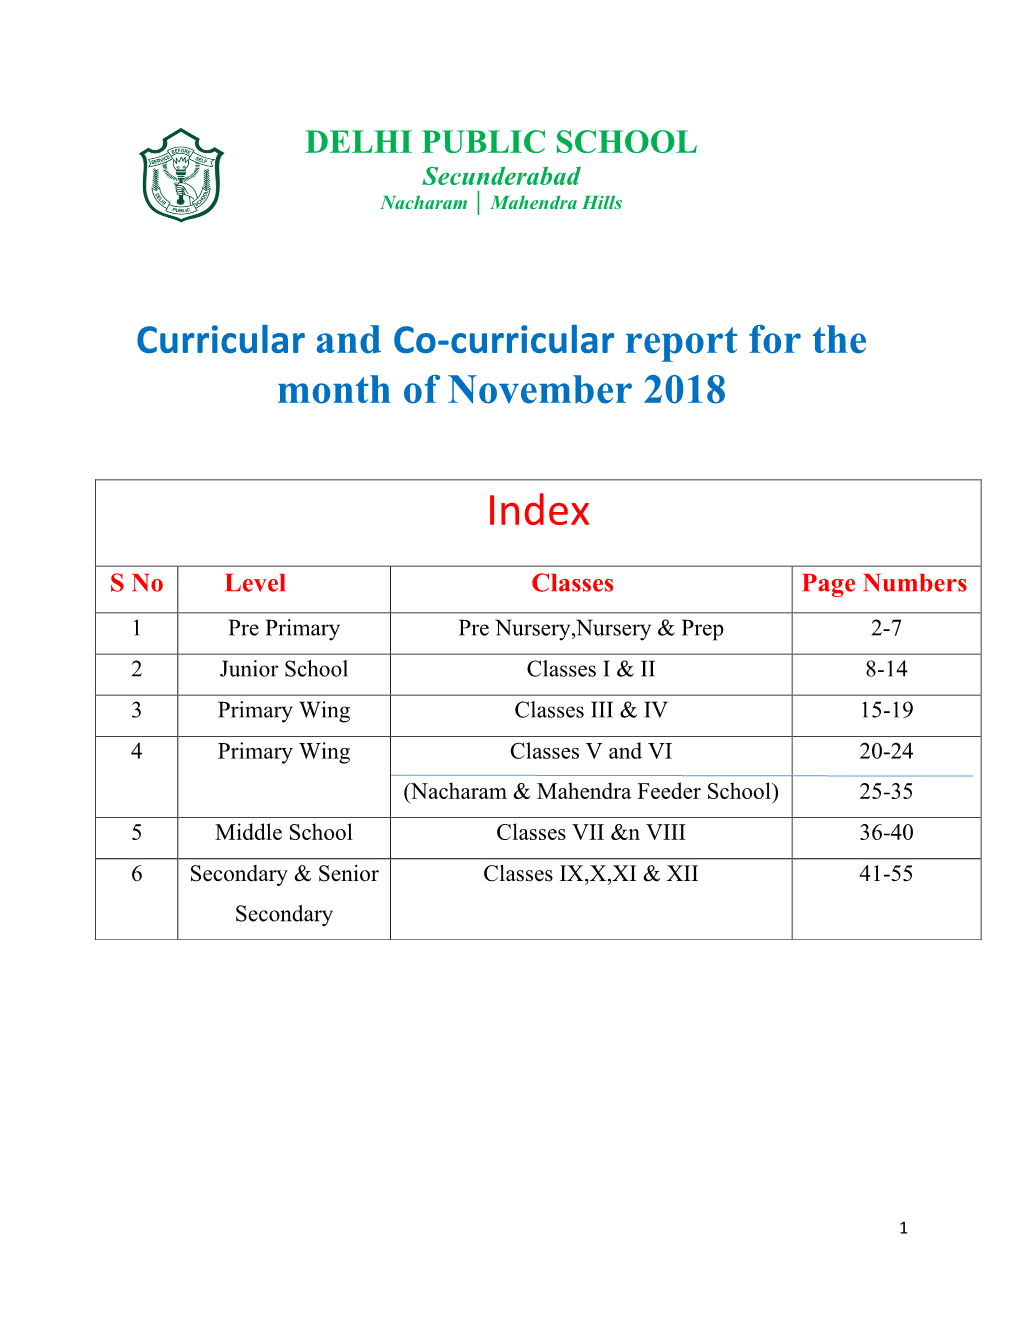 Curricular and Co-Curricular Report for the Month of November 2018